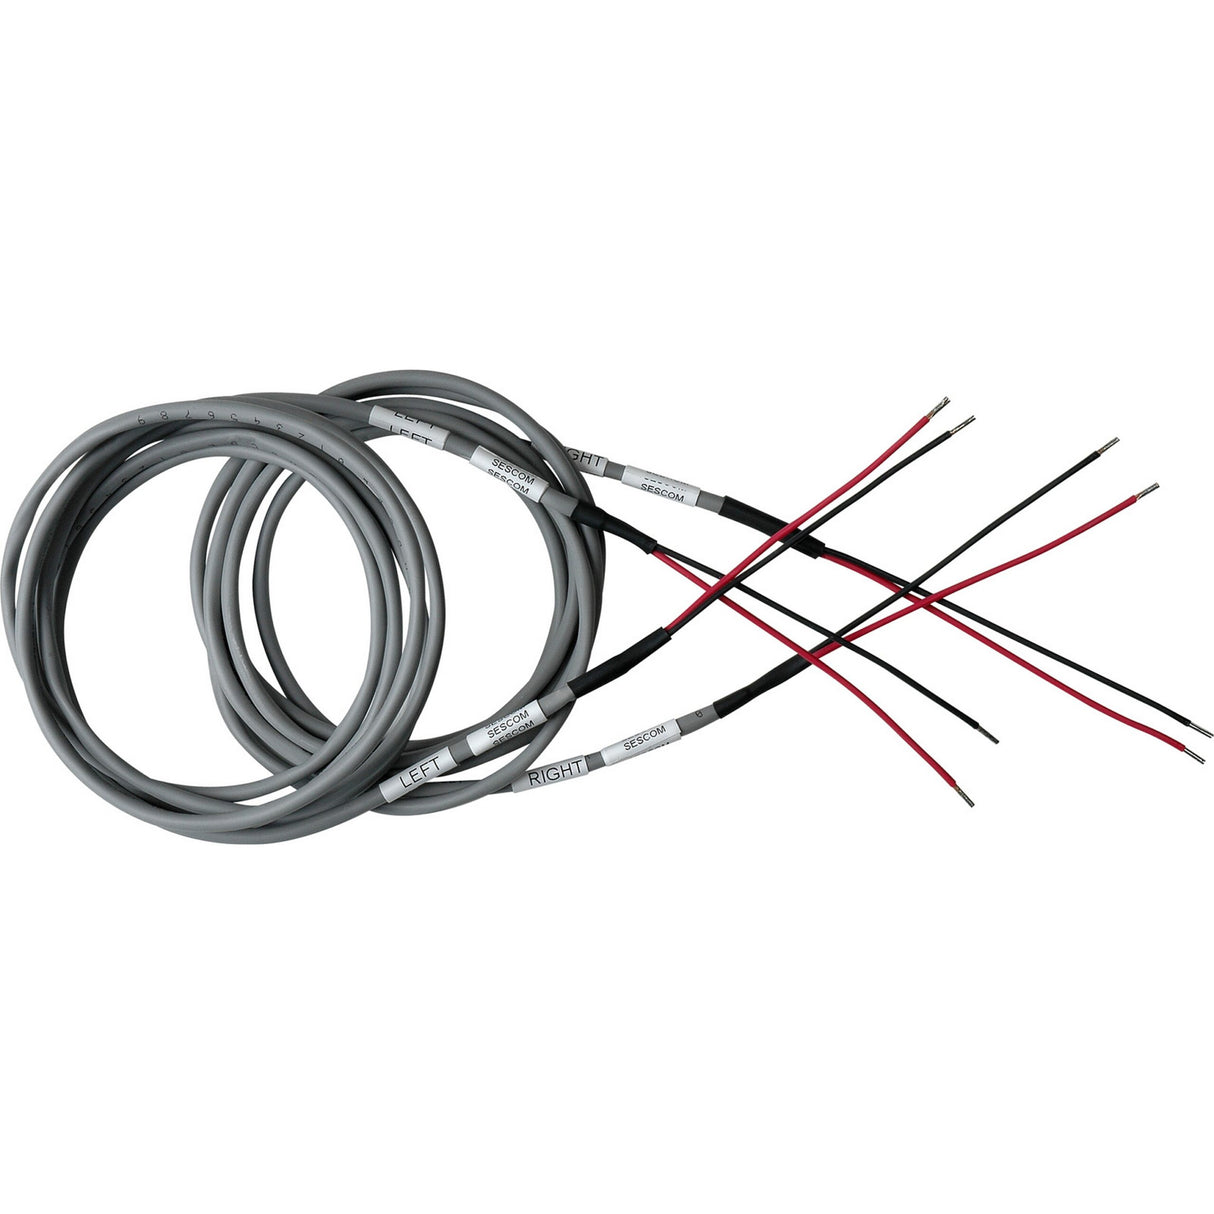 Sescom SES-SPKR-WIRE-06 High Quality Stripped and Tinned Speaker Wire Pair, 6 Foot